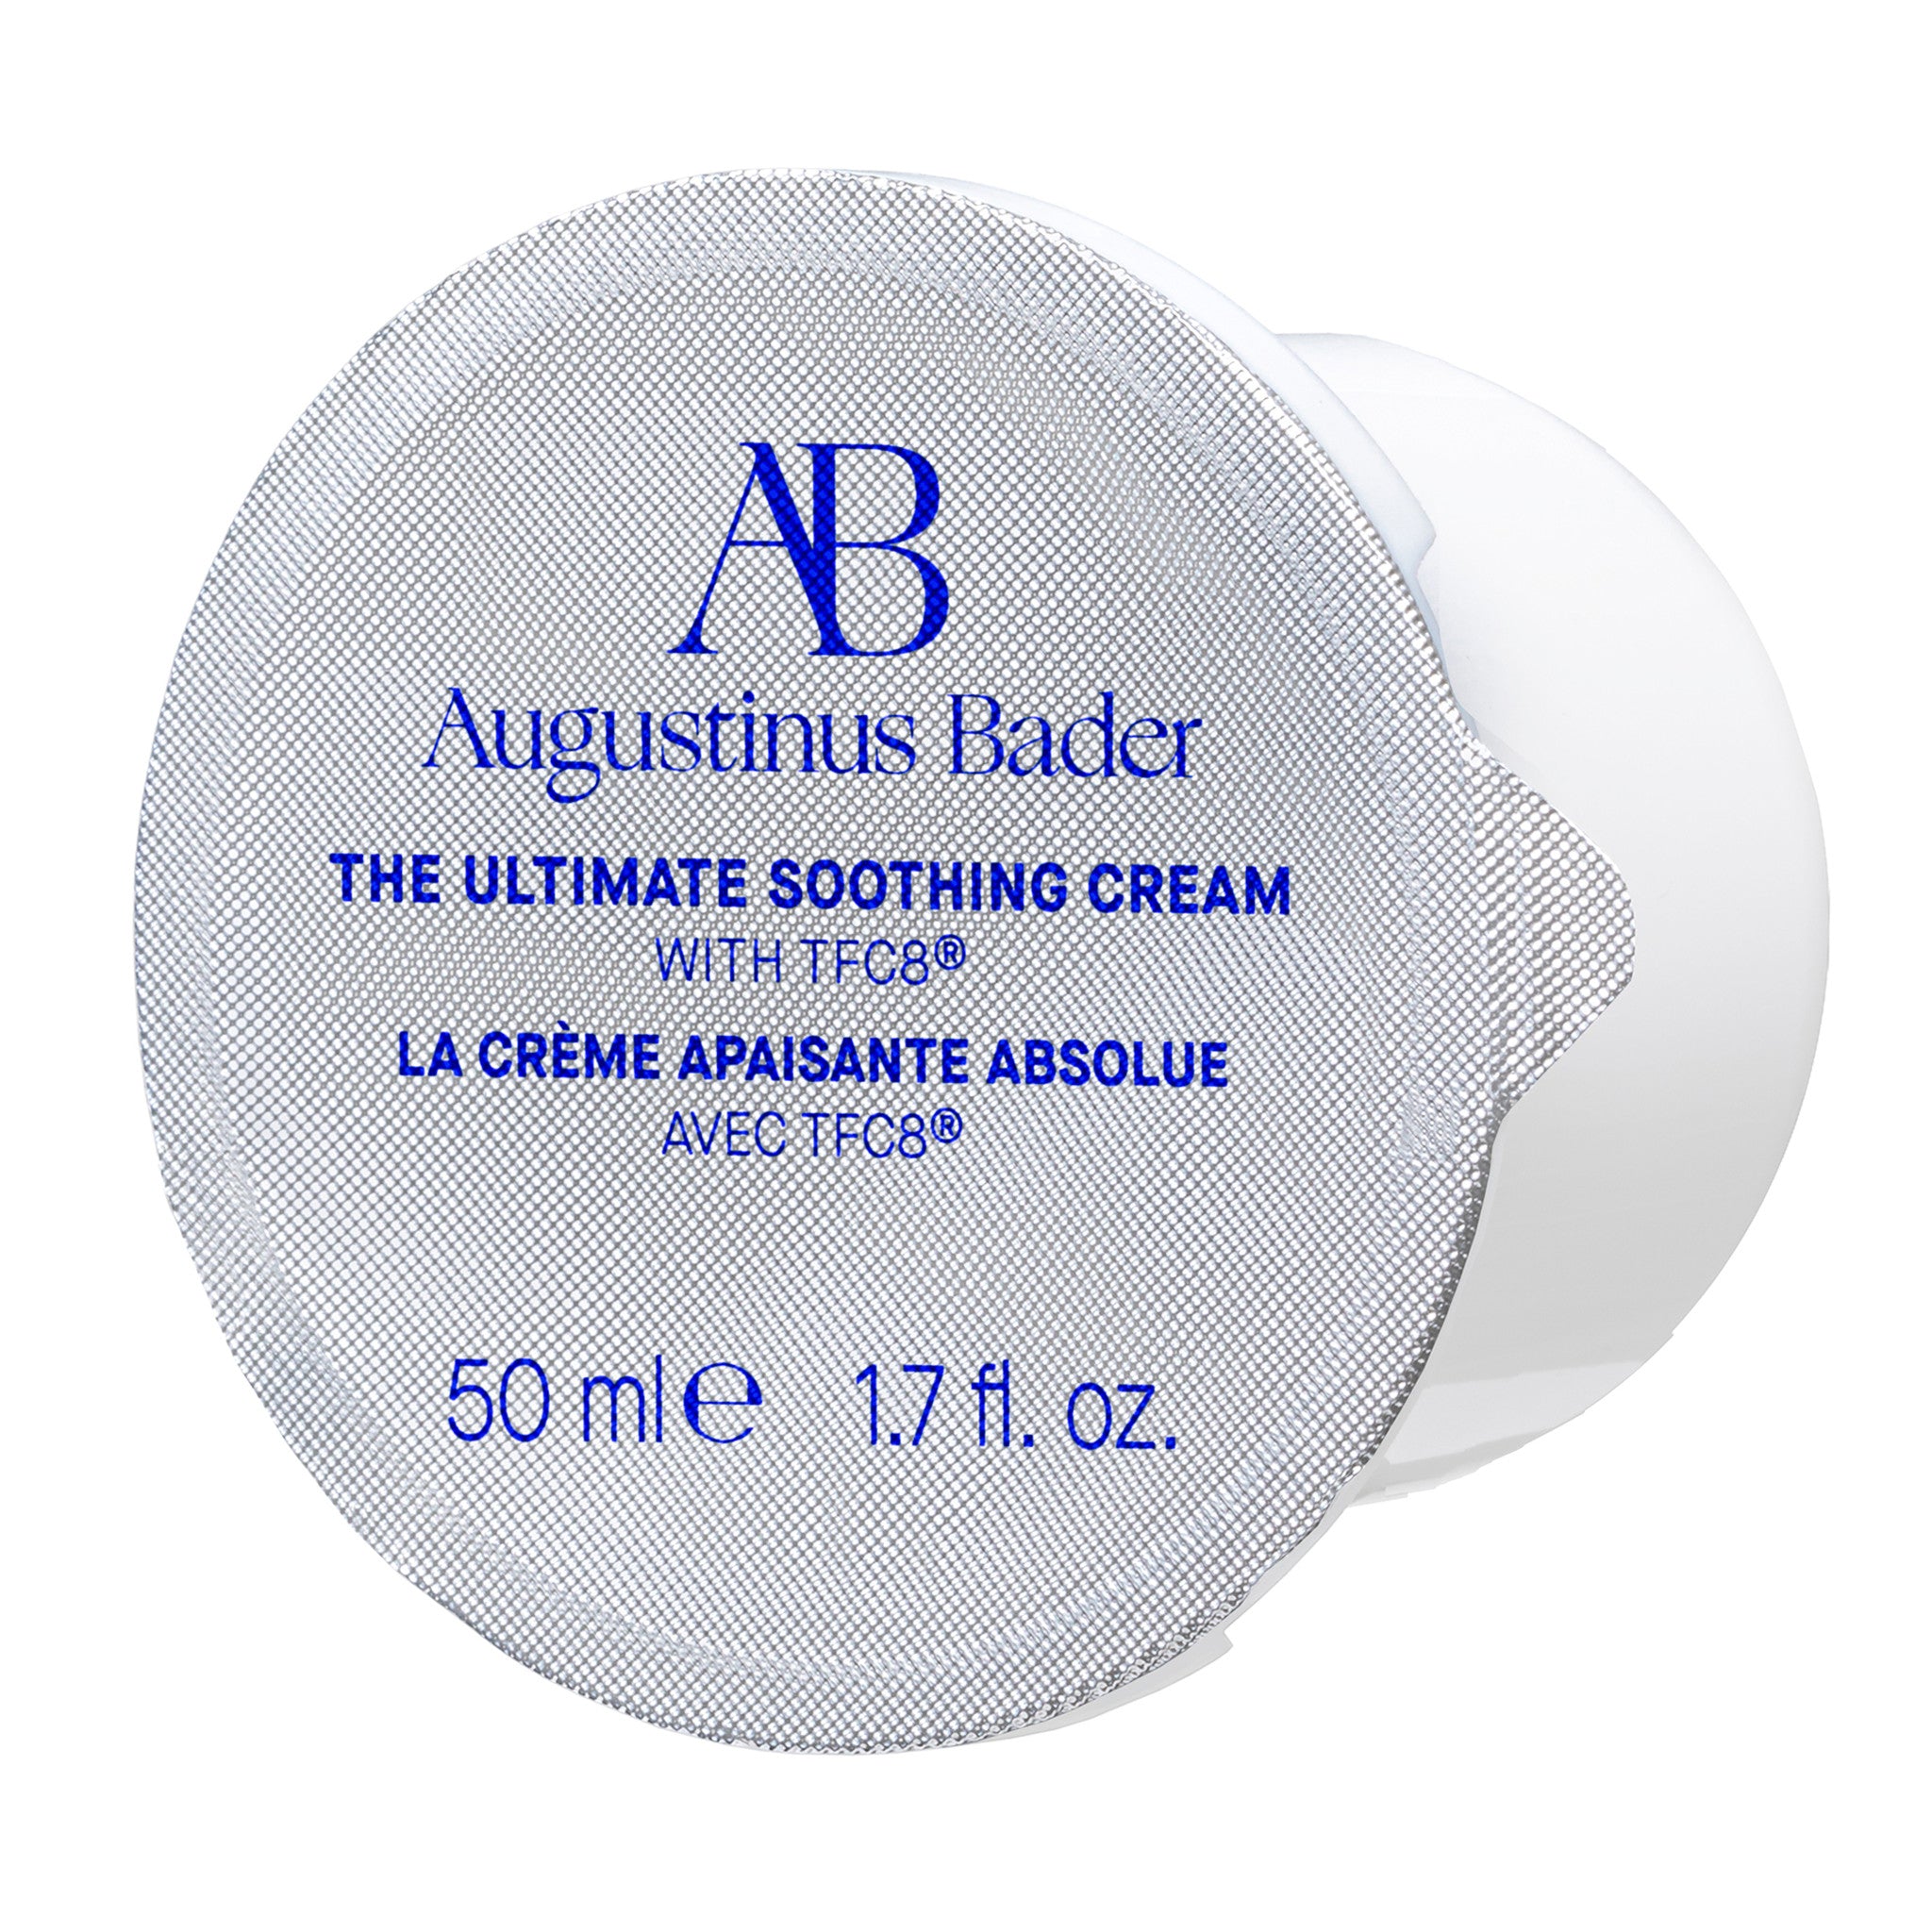 Augustinus Bader The Ultimate Soothing Cream Refill main image.